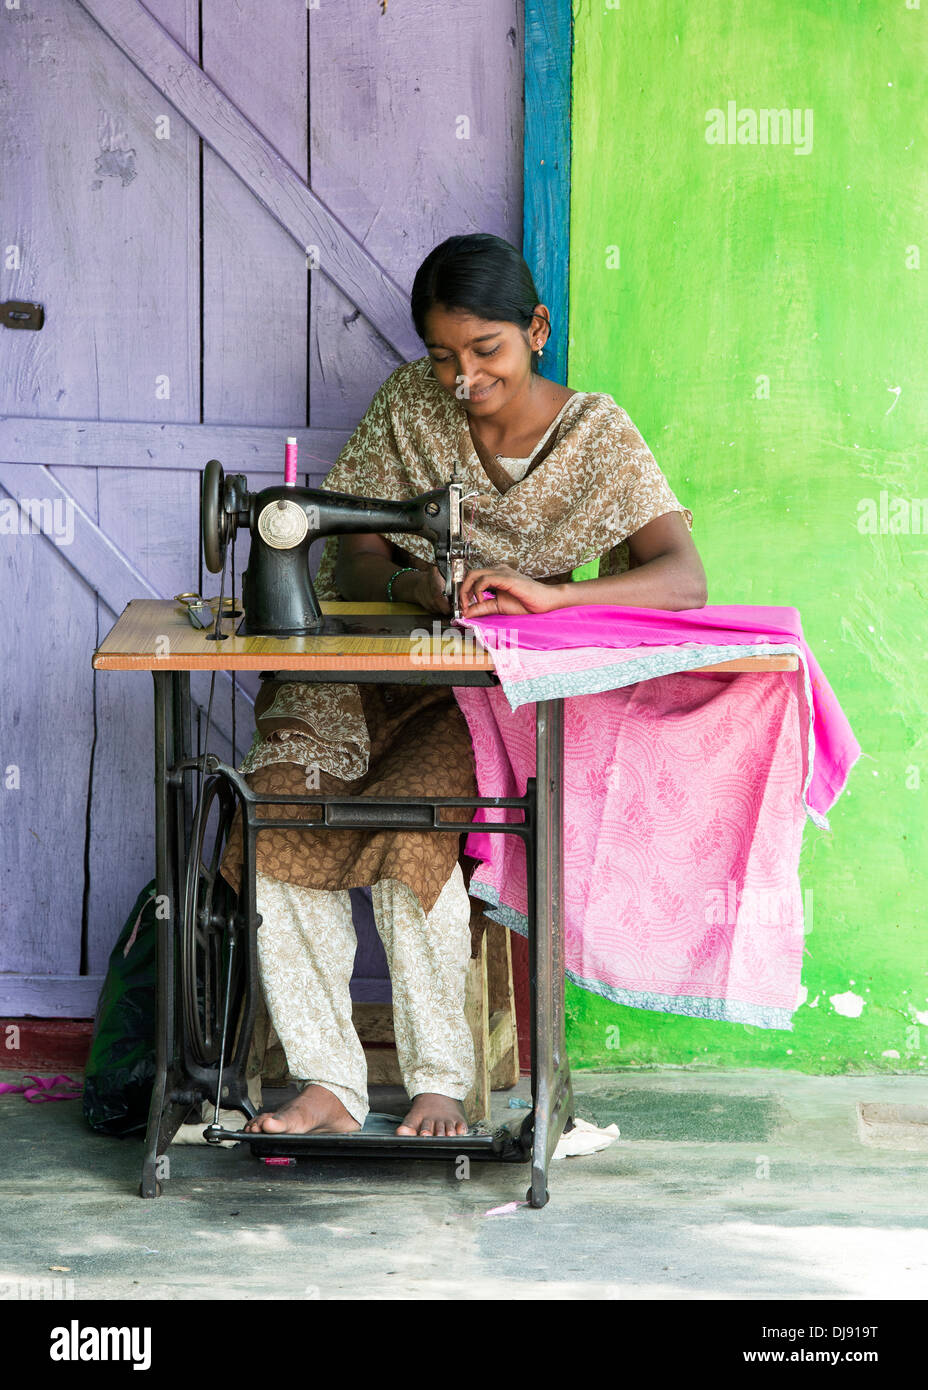 Teenage Indian girl on a sewing machine making clothes in a rural indian village. Andhra Pradesh, India Stock Photo